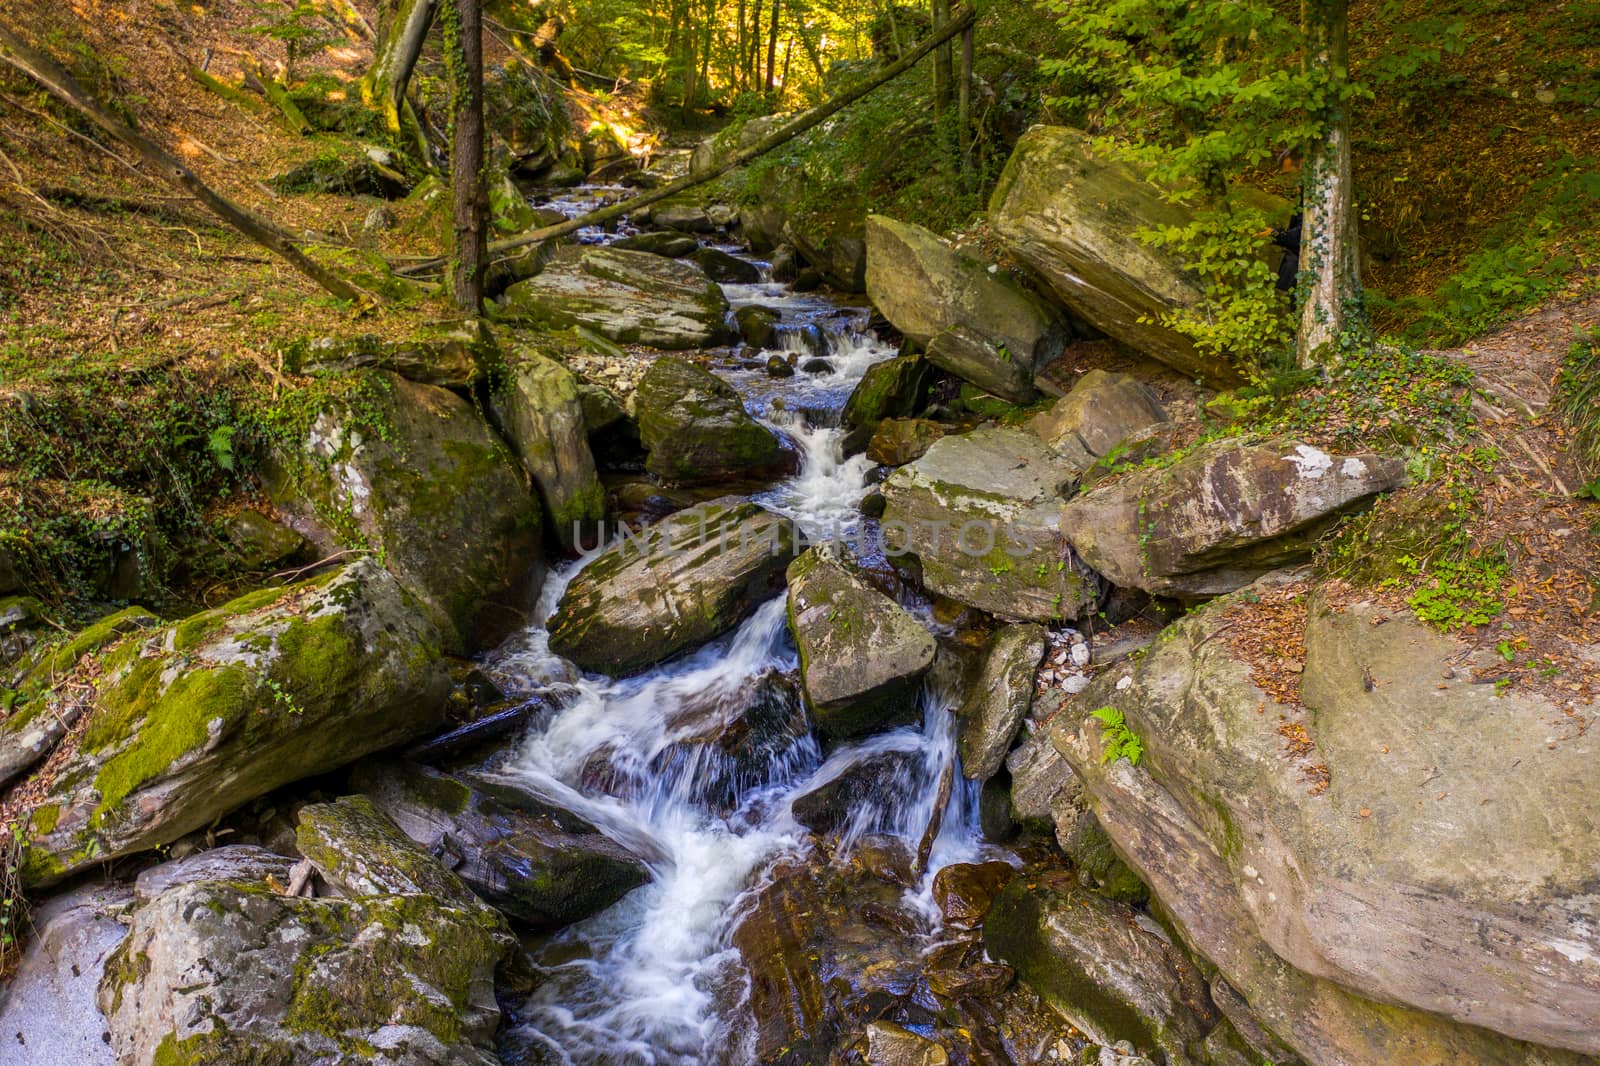 Mountain river flowing over rocks and boulders in forest by asafaric